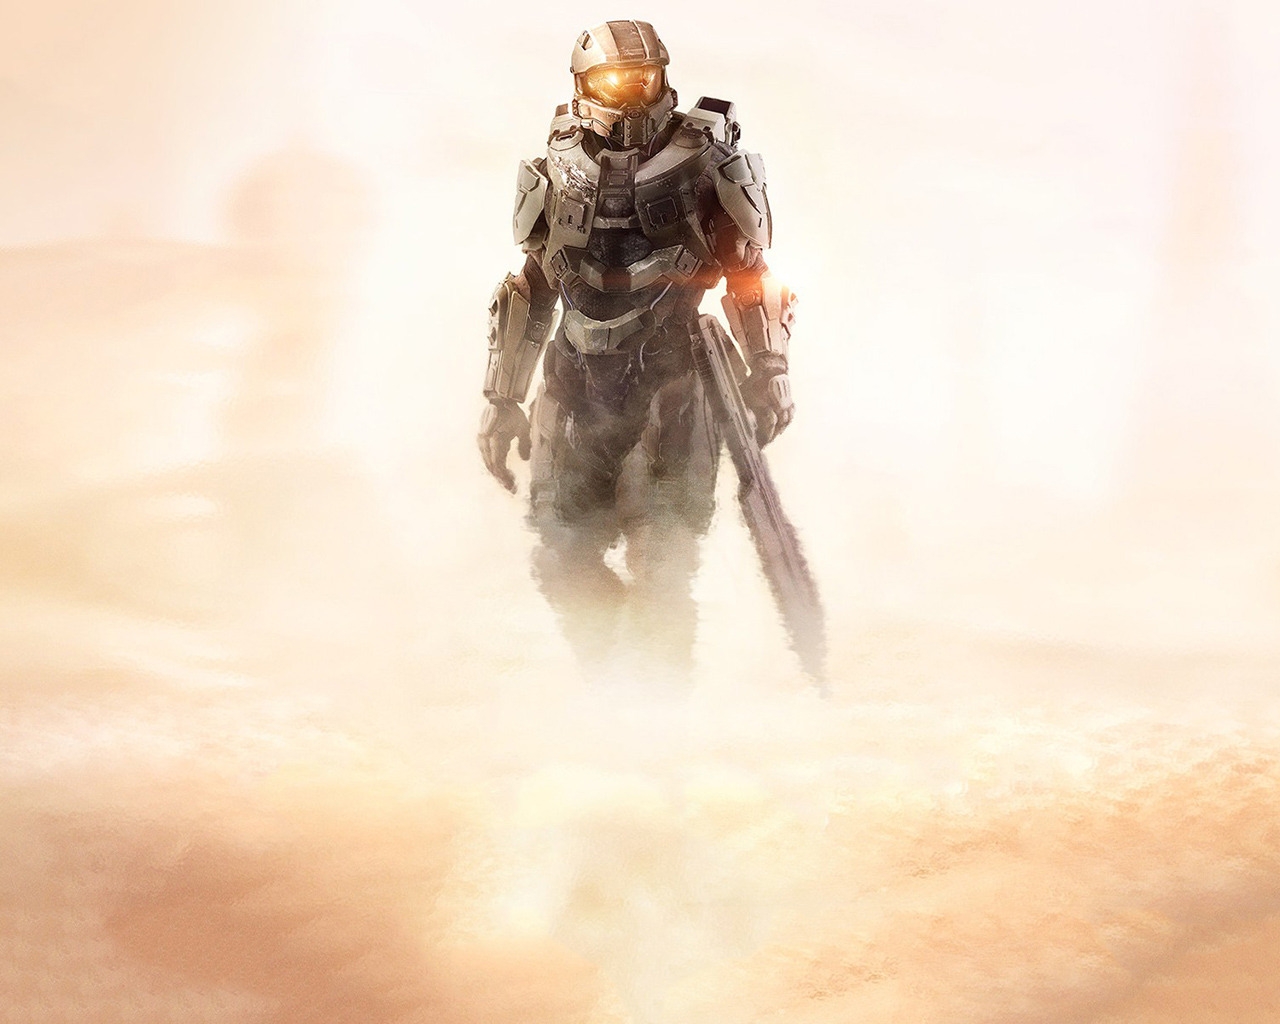 Halo 5 Guardians for 1280 x 1024 resolution